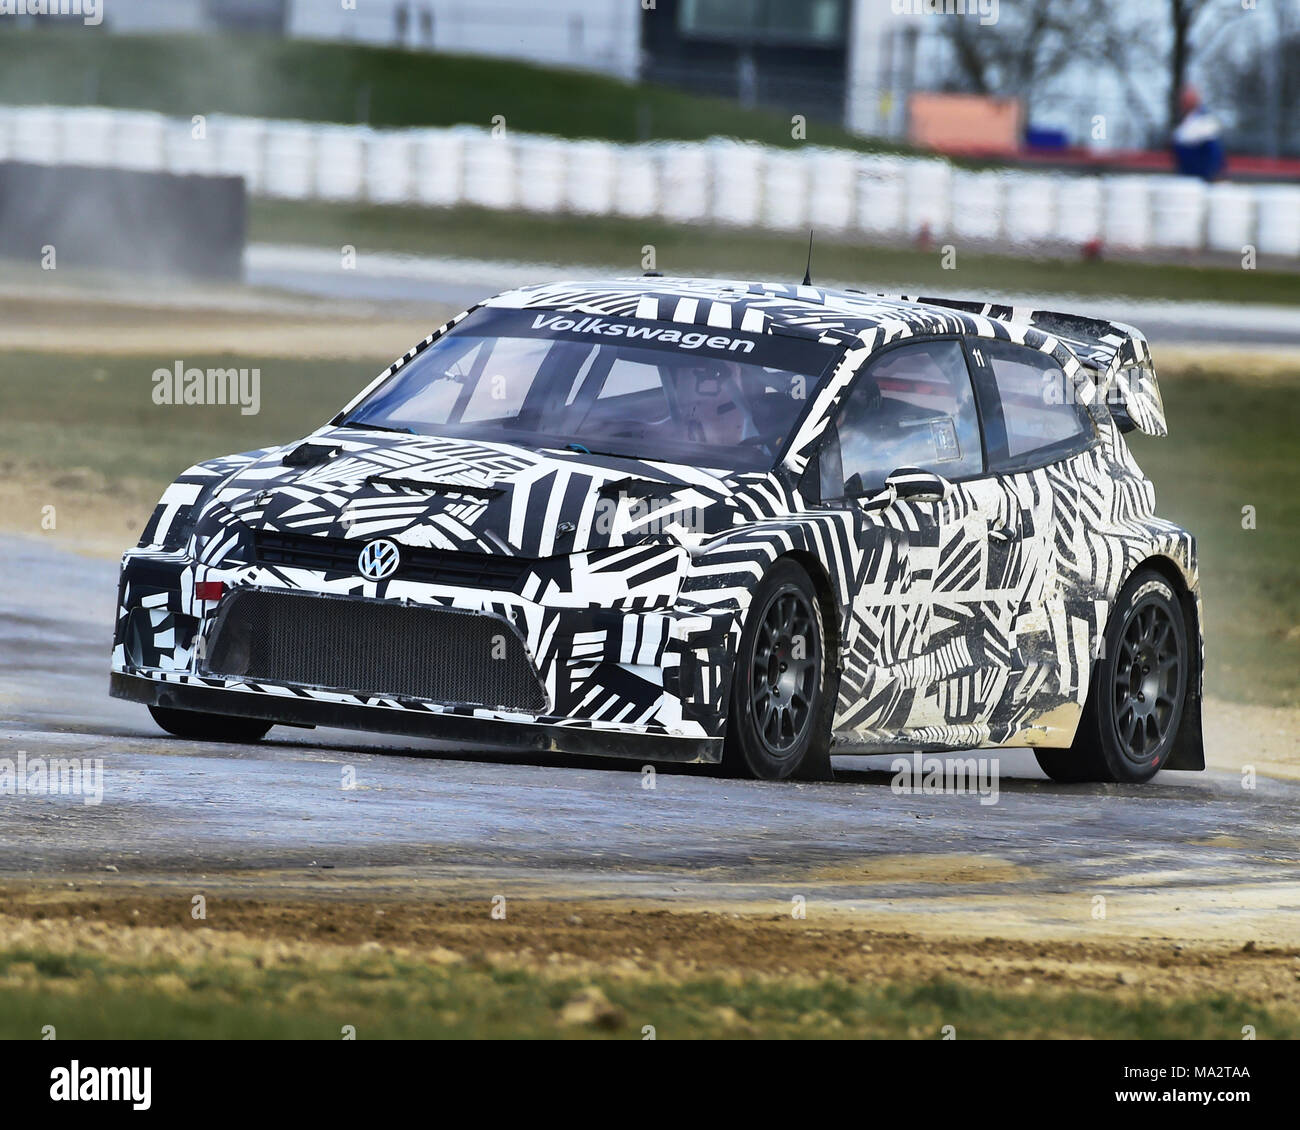 Silverstone, Northamptonshire, England, 26th March 2018, Volkswagen Polo  Supercar RX, for the FIA World Rallycross Championship, at the 2018 World RX  Stock Photo - Alamy